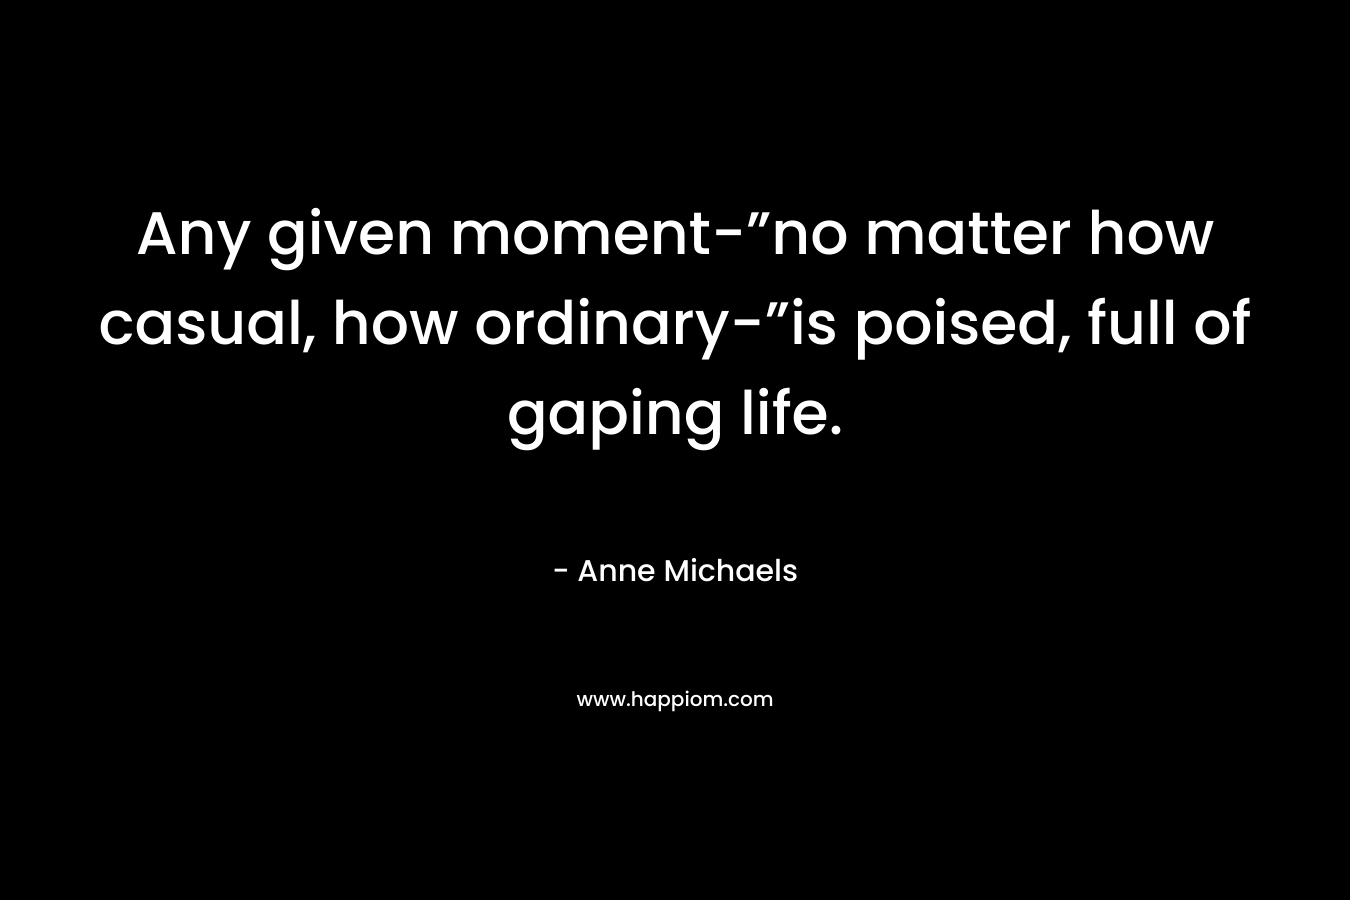 Any given moment-”no matter how casual, how ordinary-”is poised, full of gaping life. – Anne Michaels